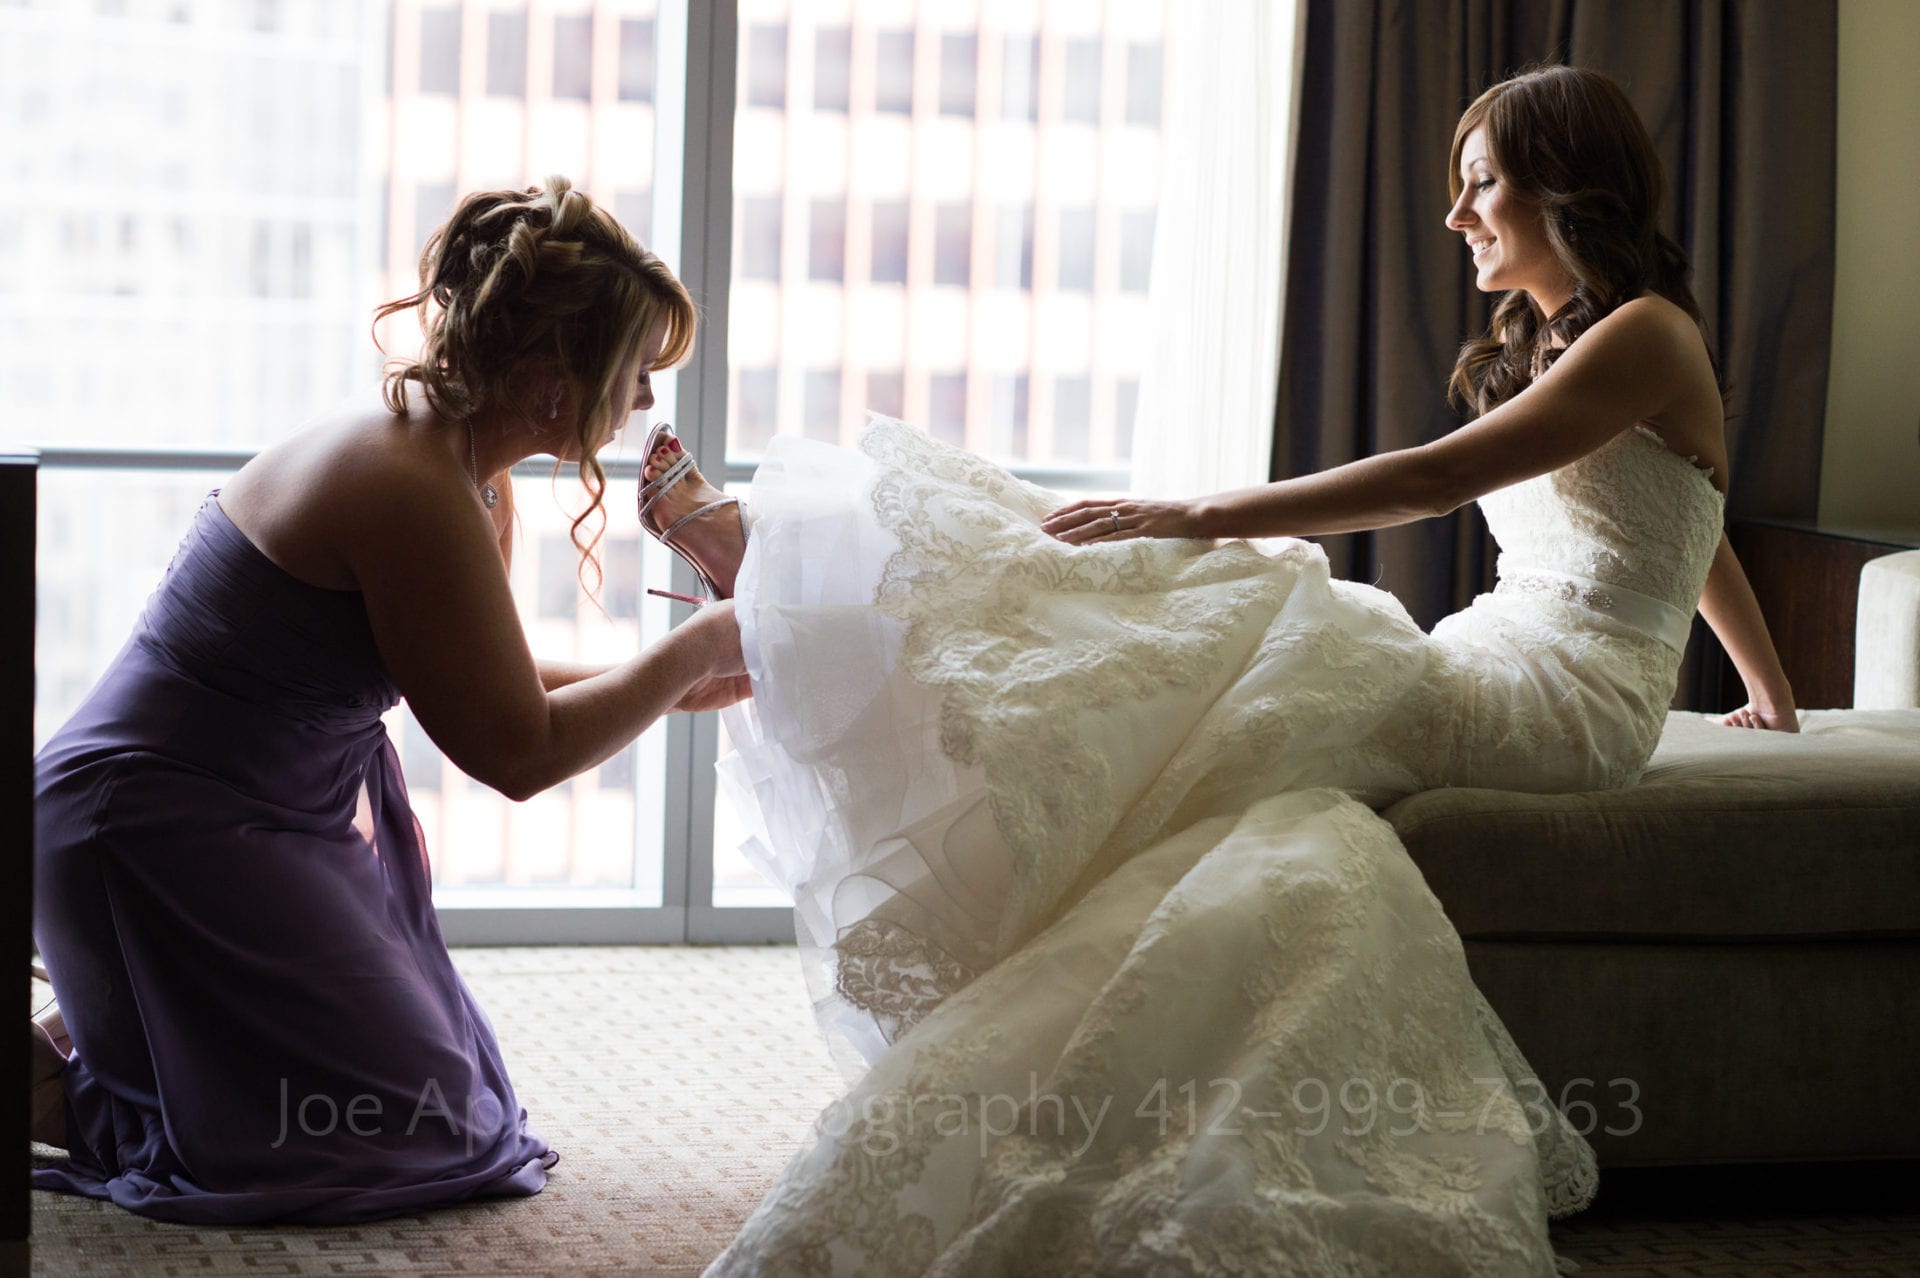 A bride sits on the end of a bed while her bridesmaid helps put on her shoes. The window behind them provides the lighting Fairmont Hotel Pittsburgh Weddings.